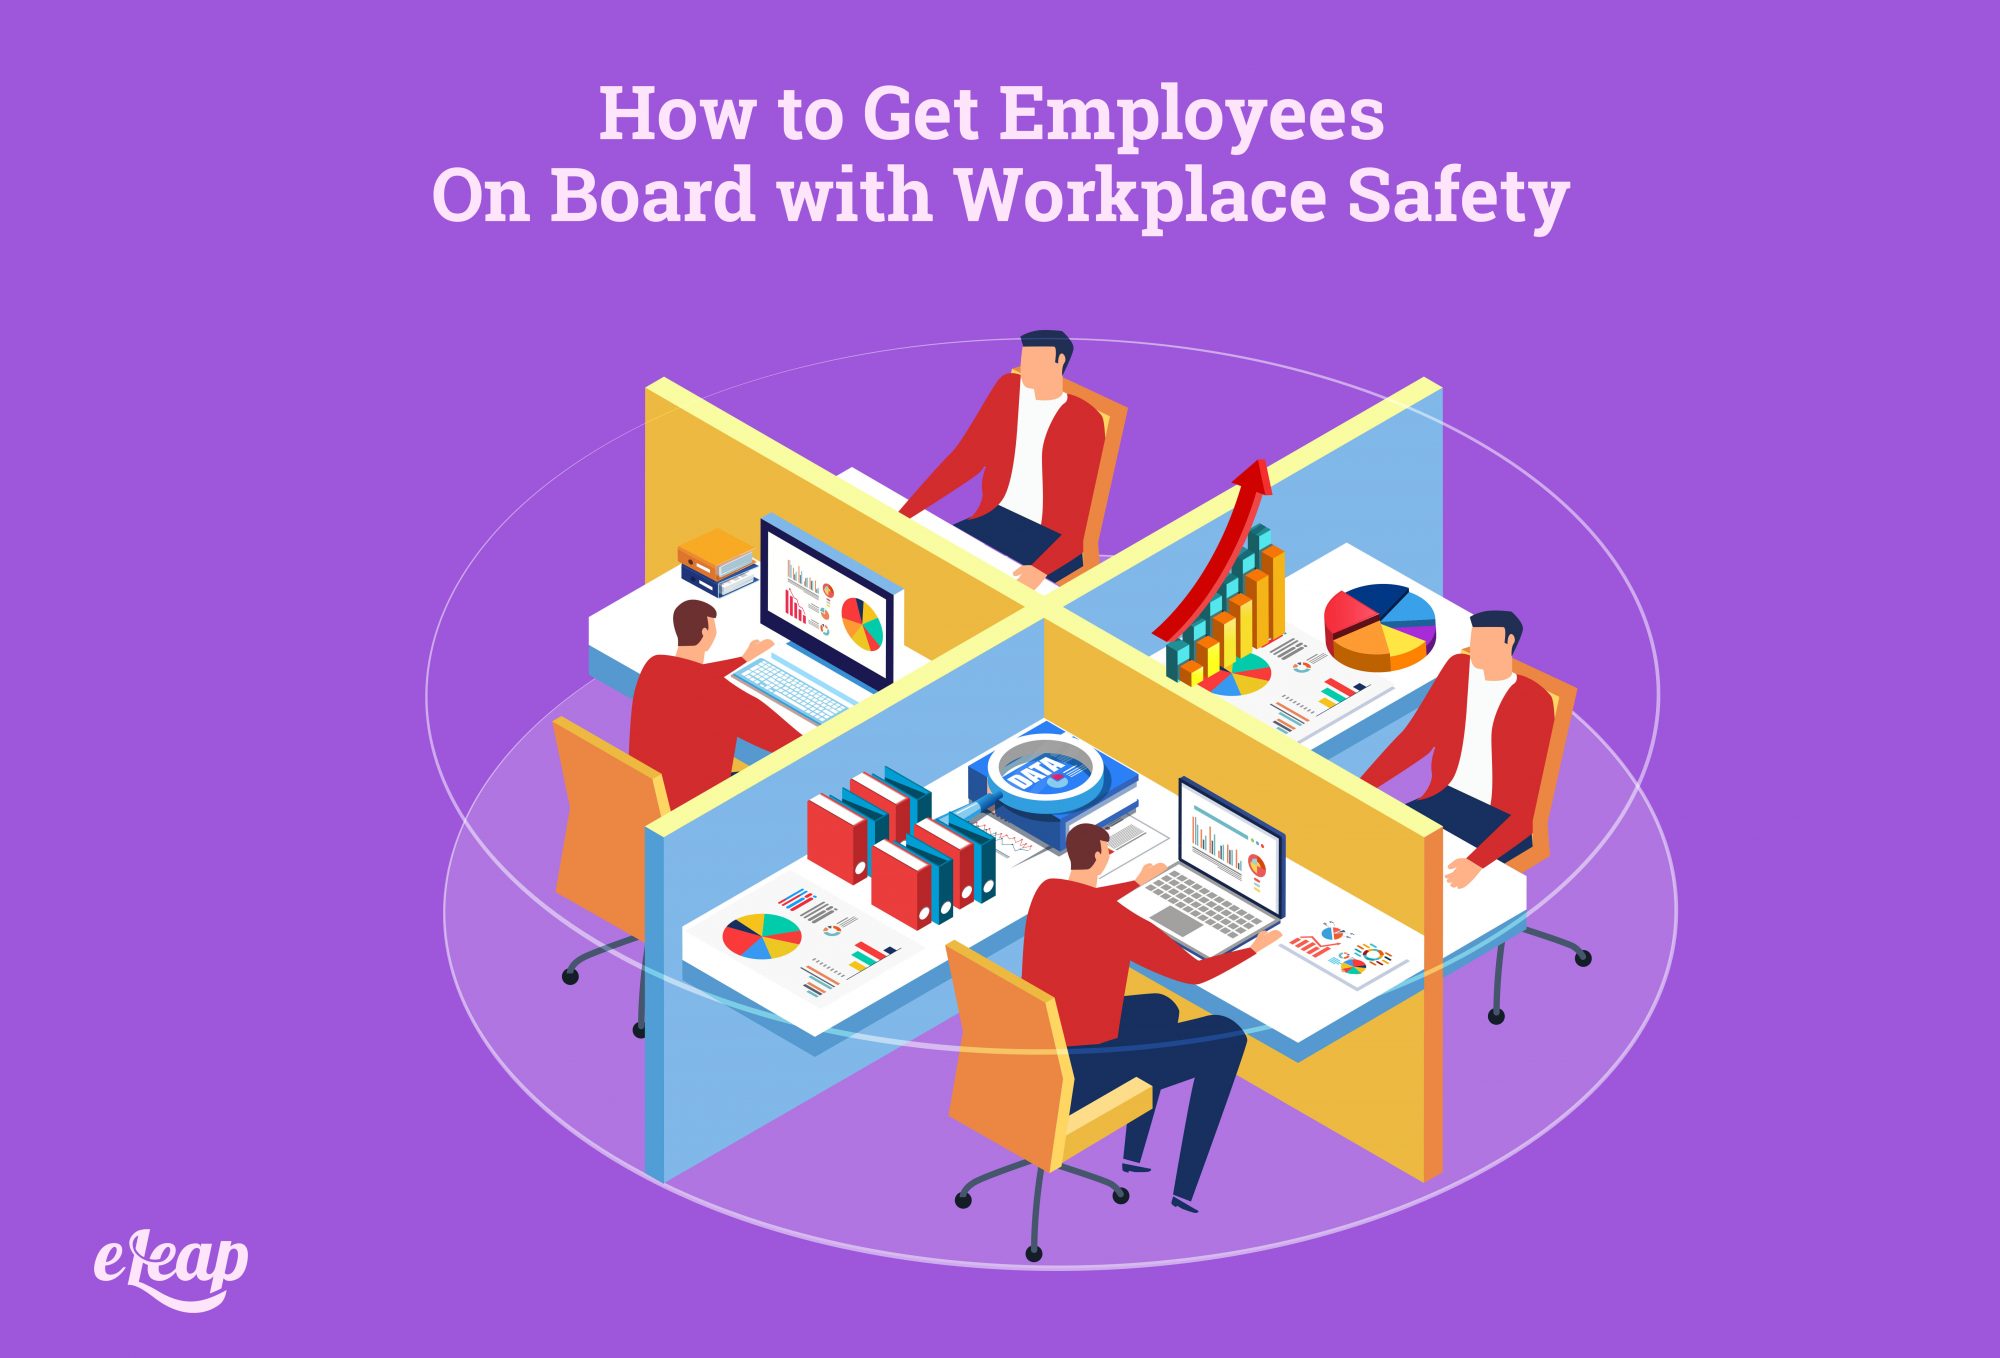 How to Get Employees On Board with Workplace Safety